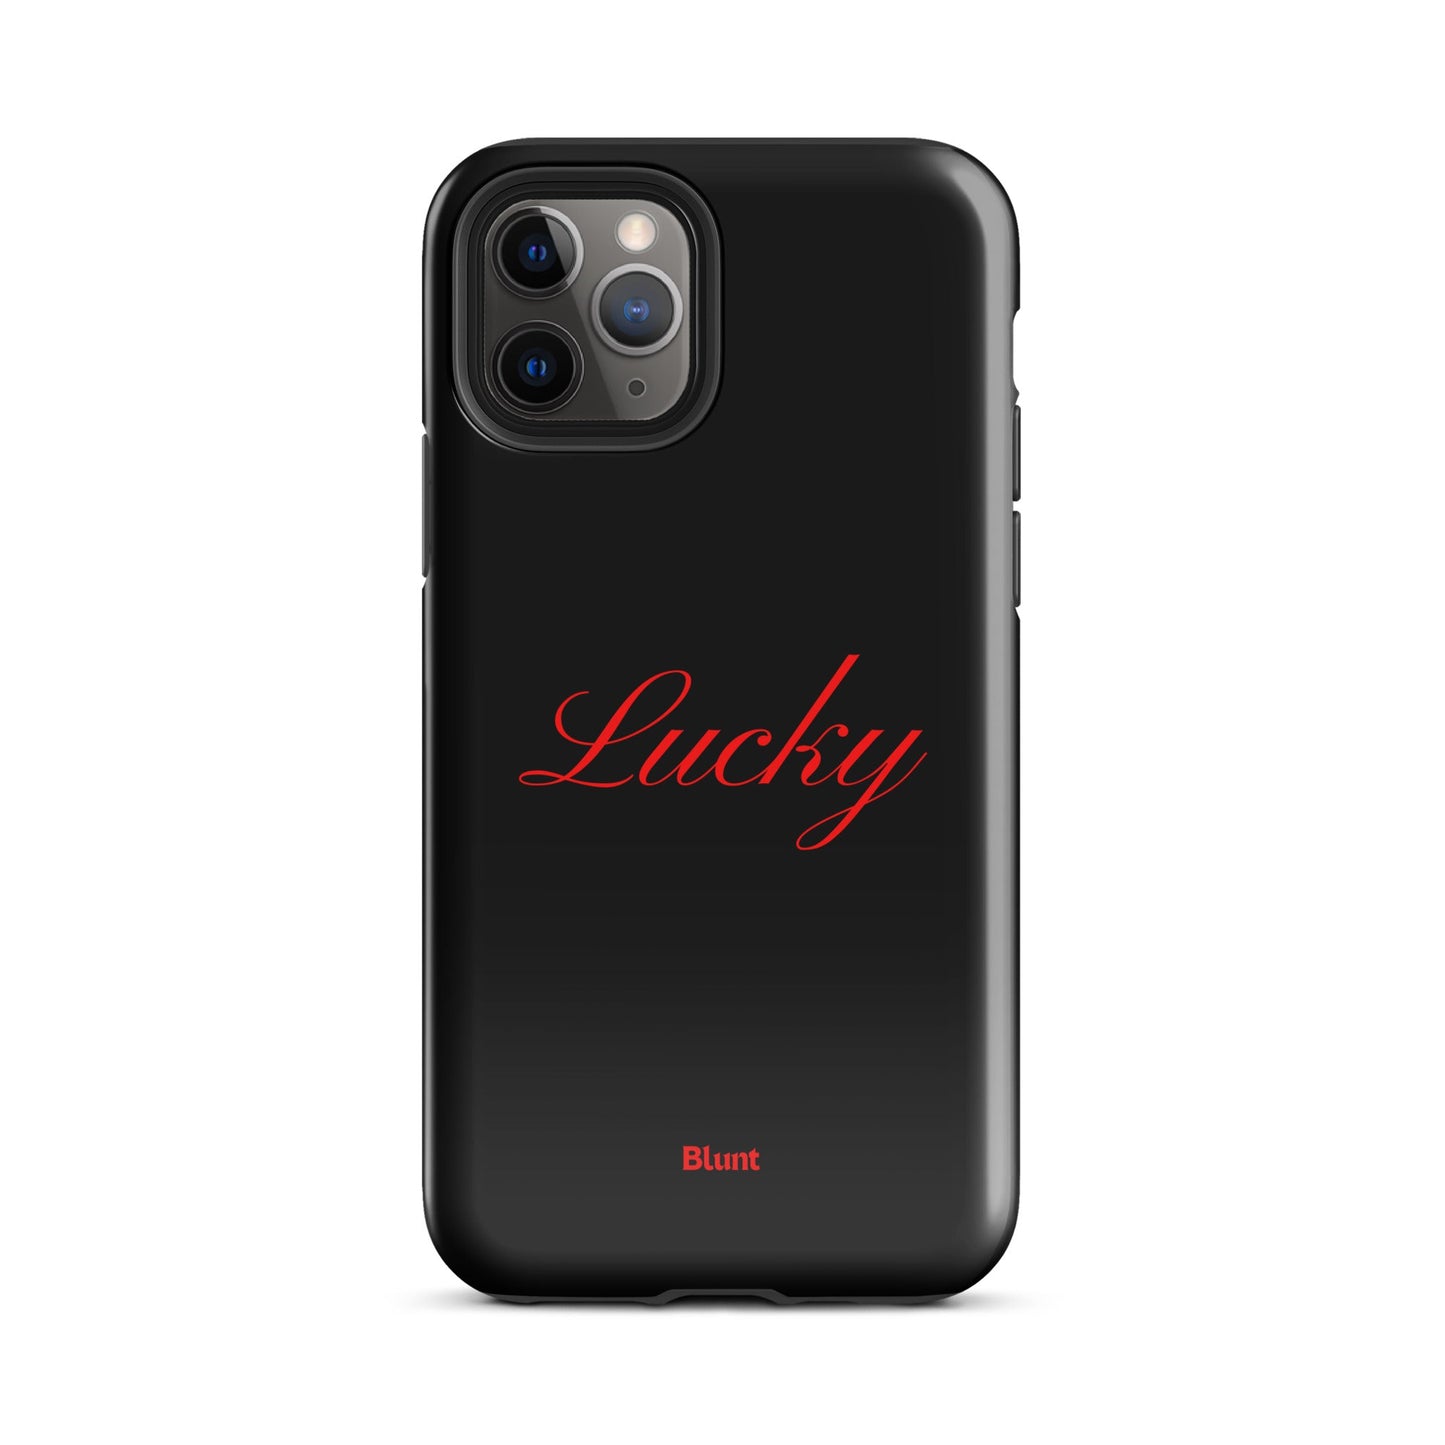 Lucky iPhone Case - blunt cases